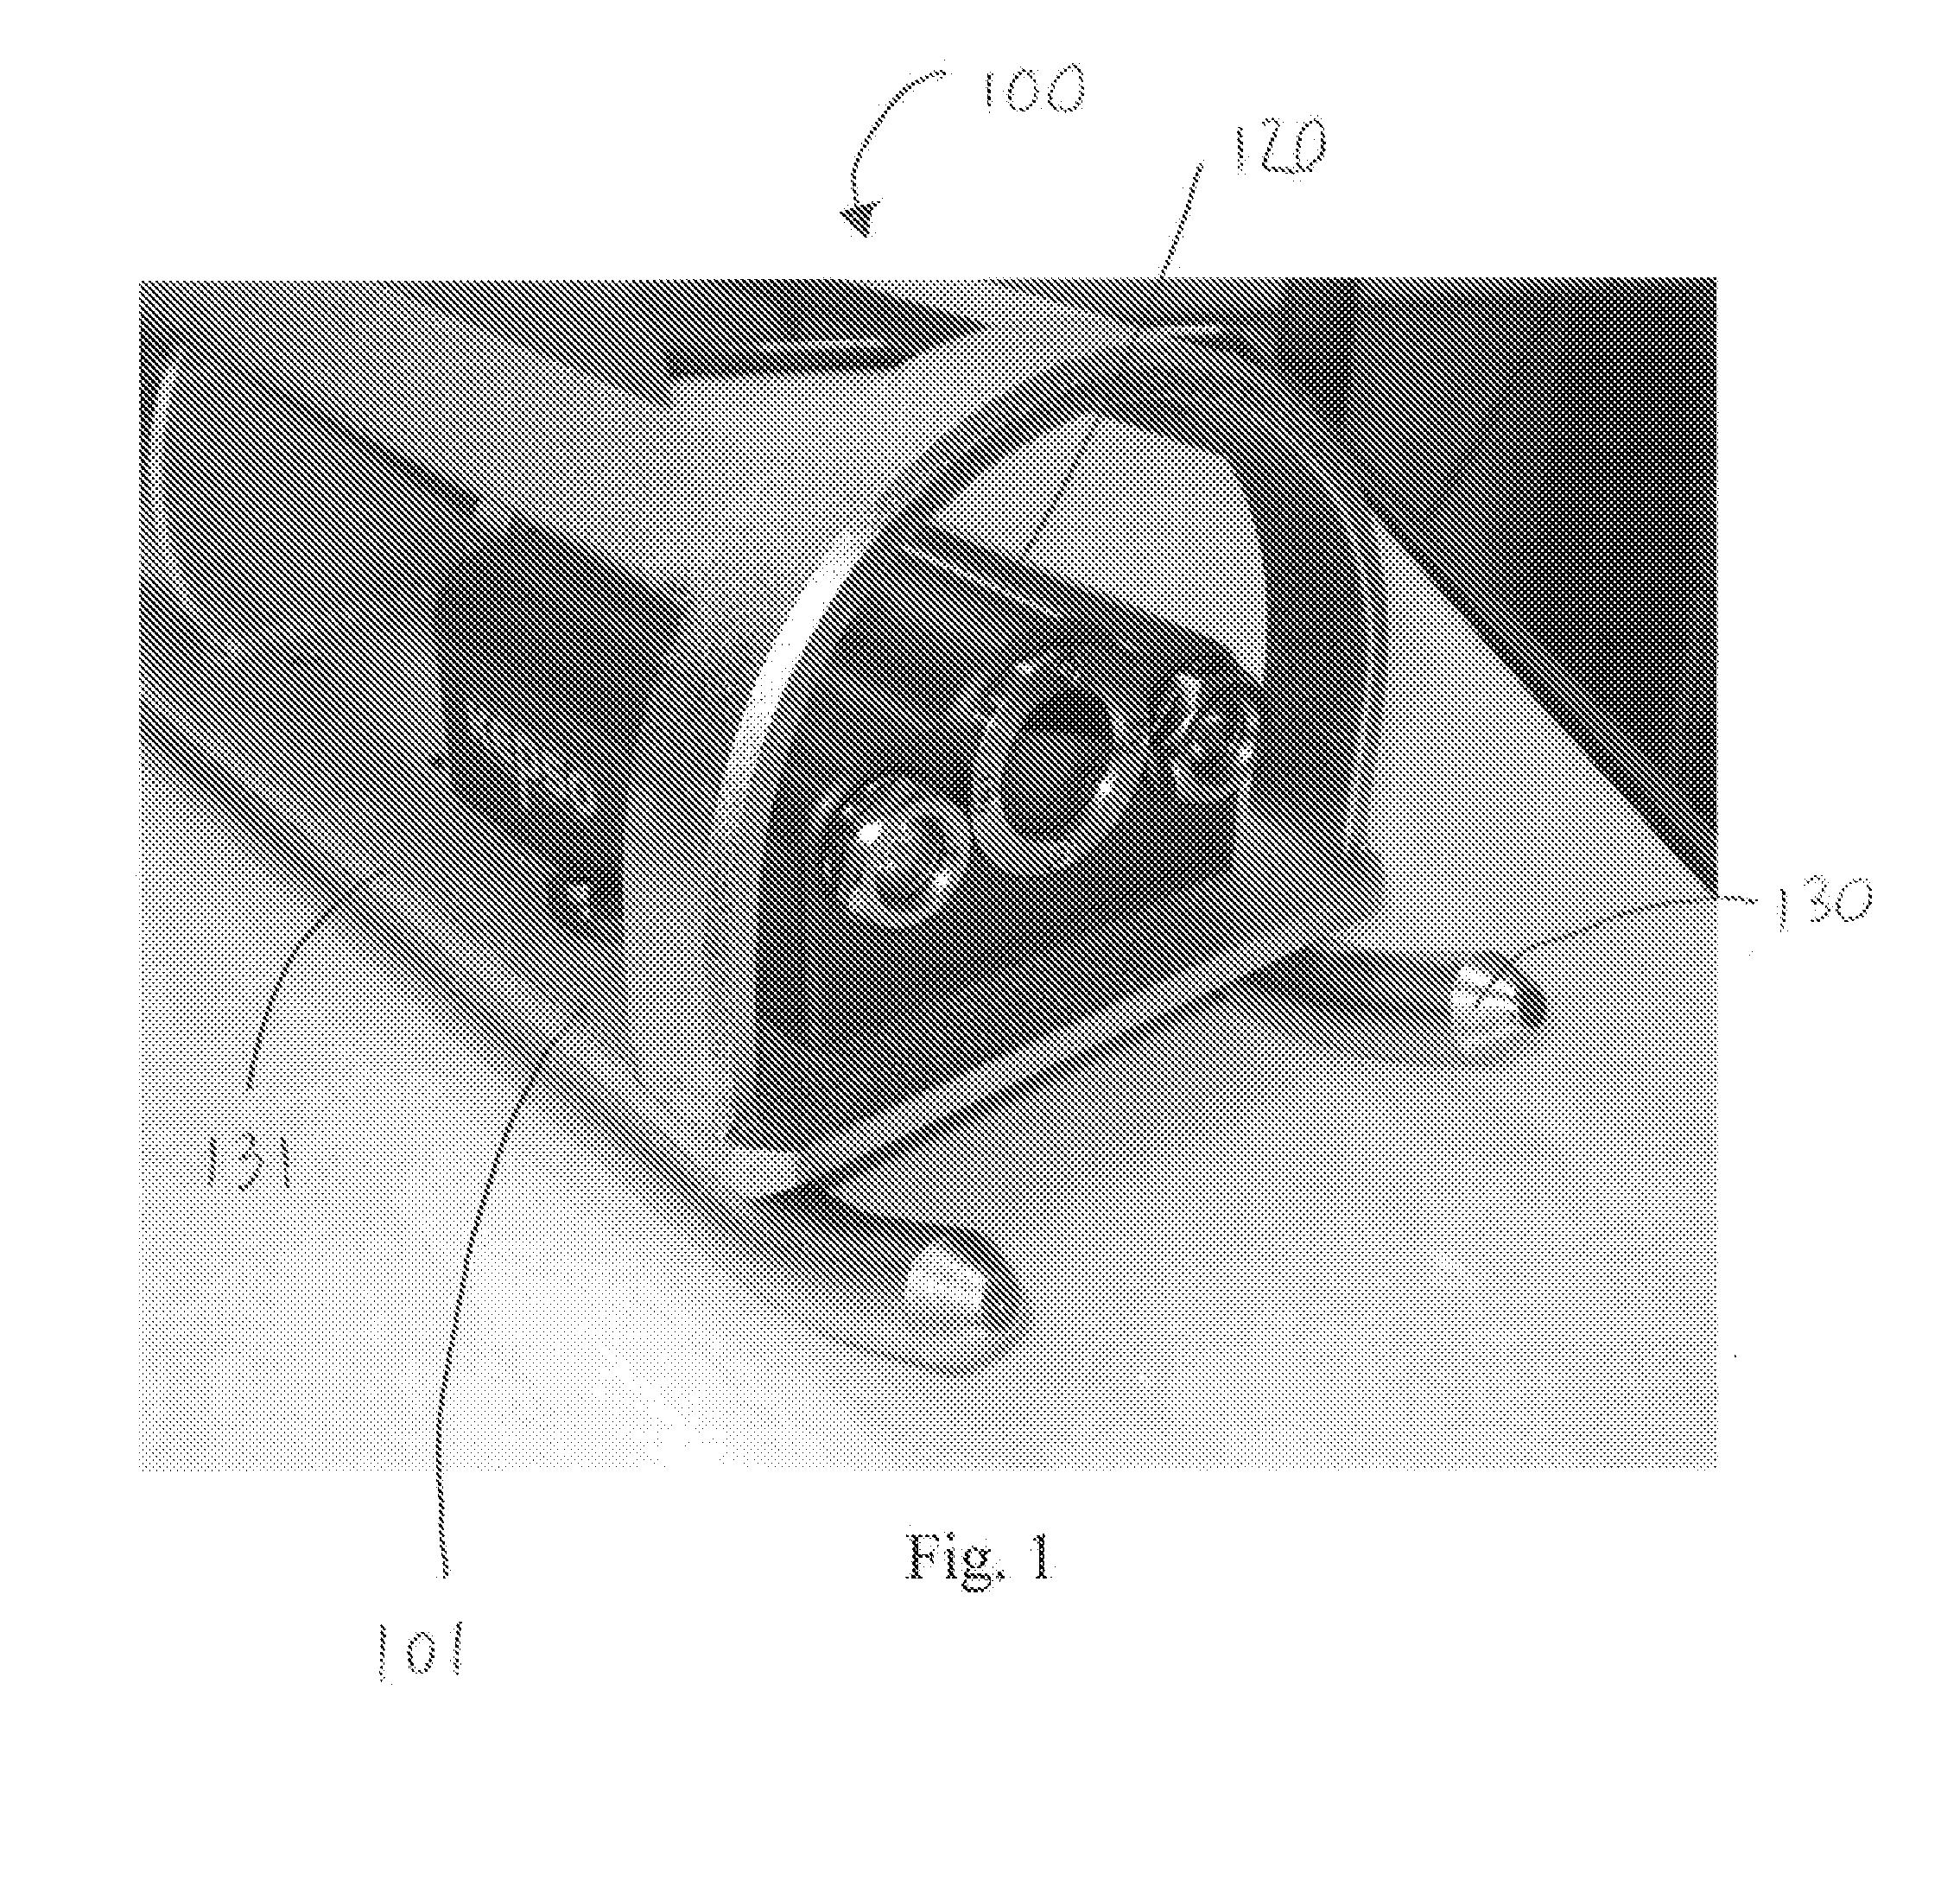 Nozzle-mounted camera system and method